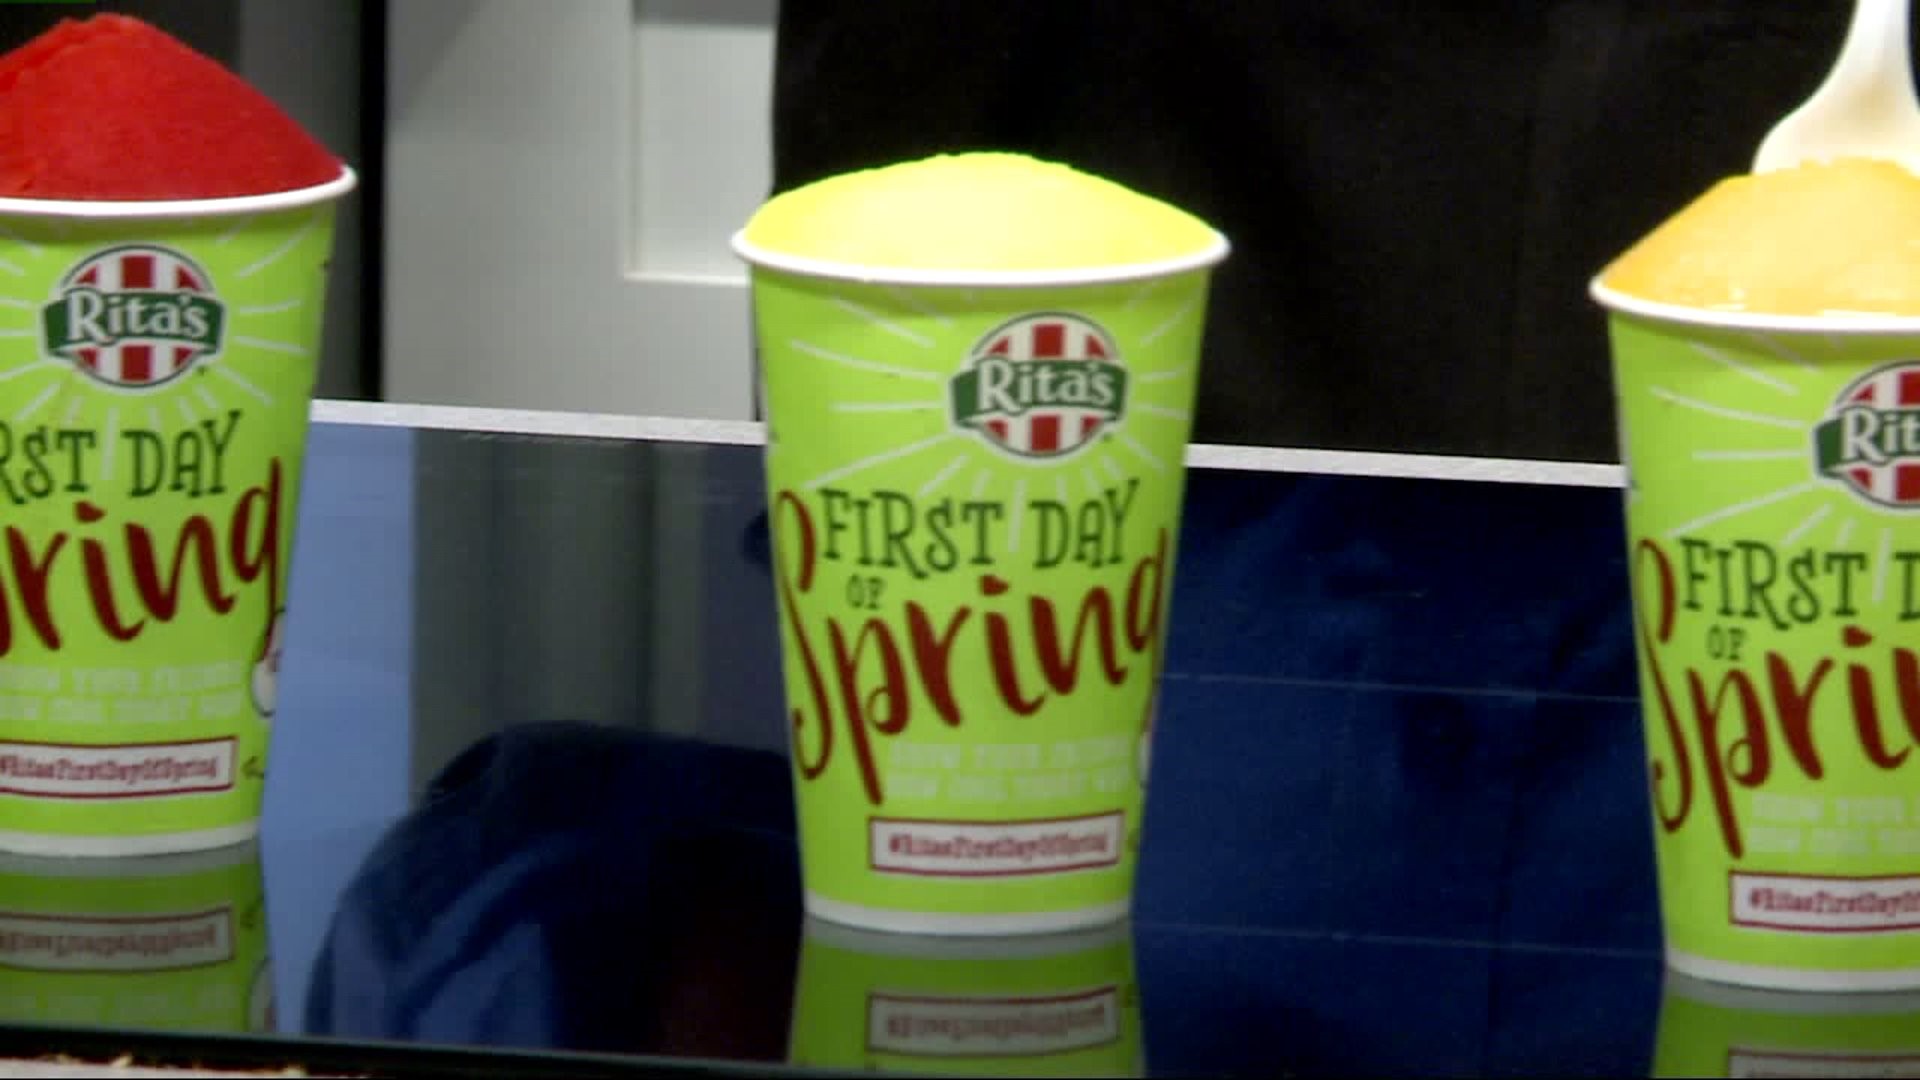 Rita`s continues first day of Spring tradition, offers free ice